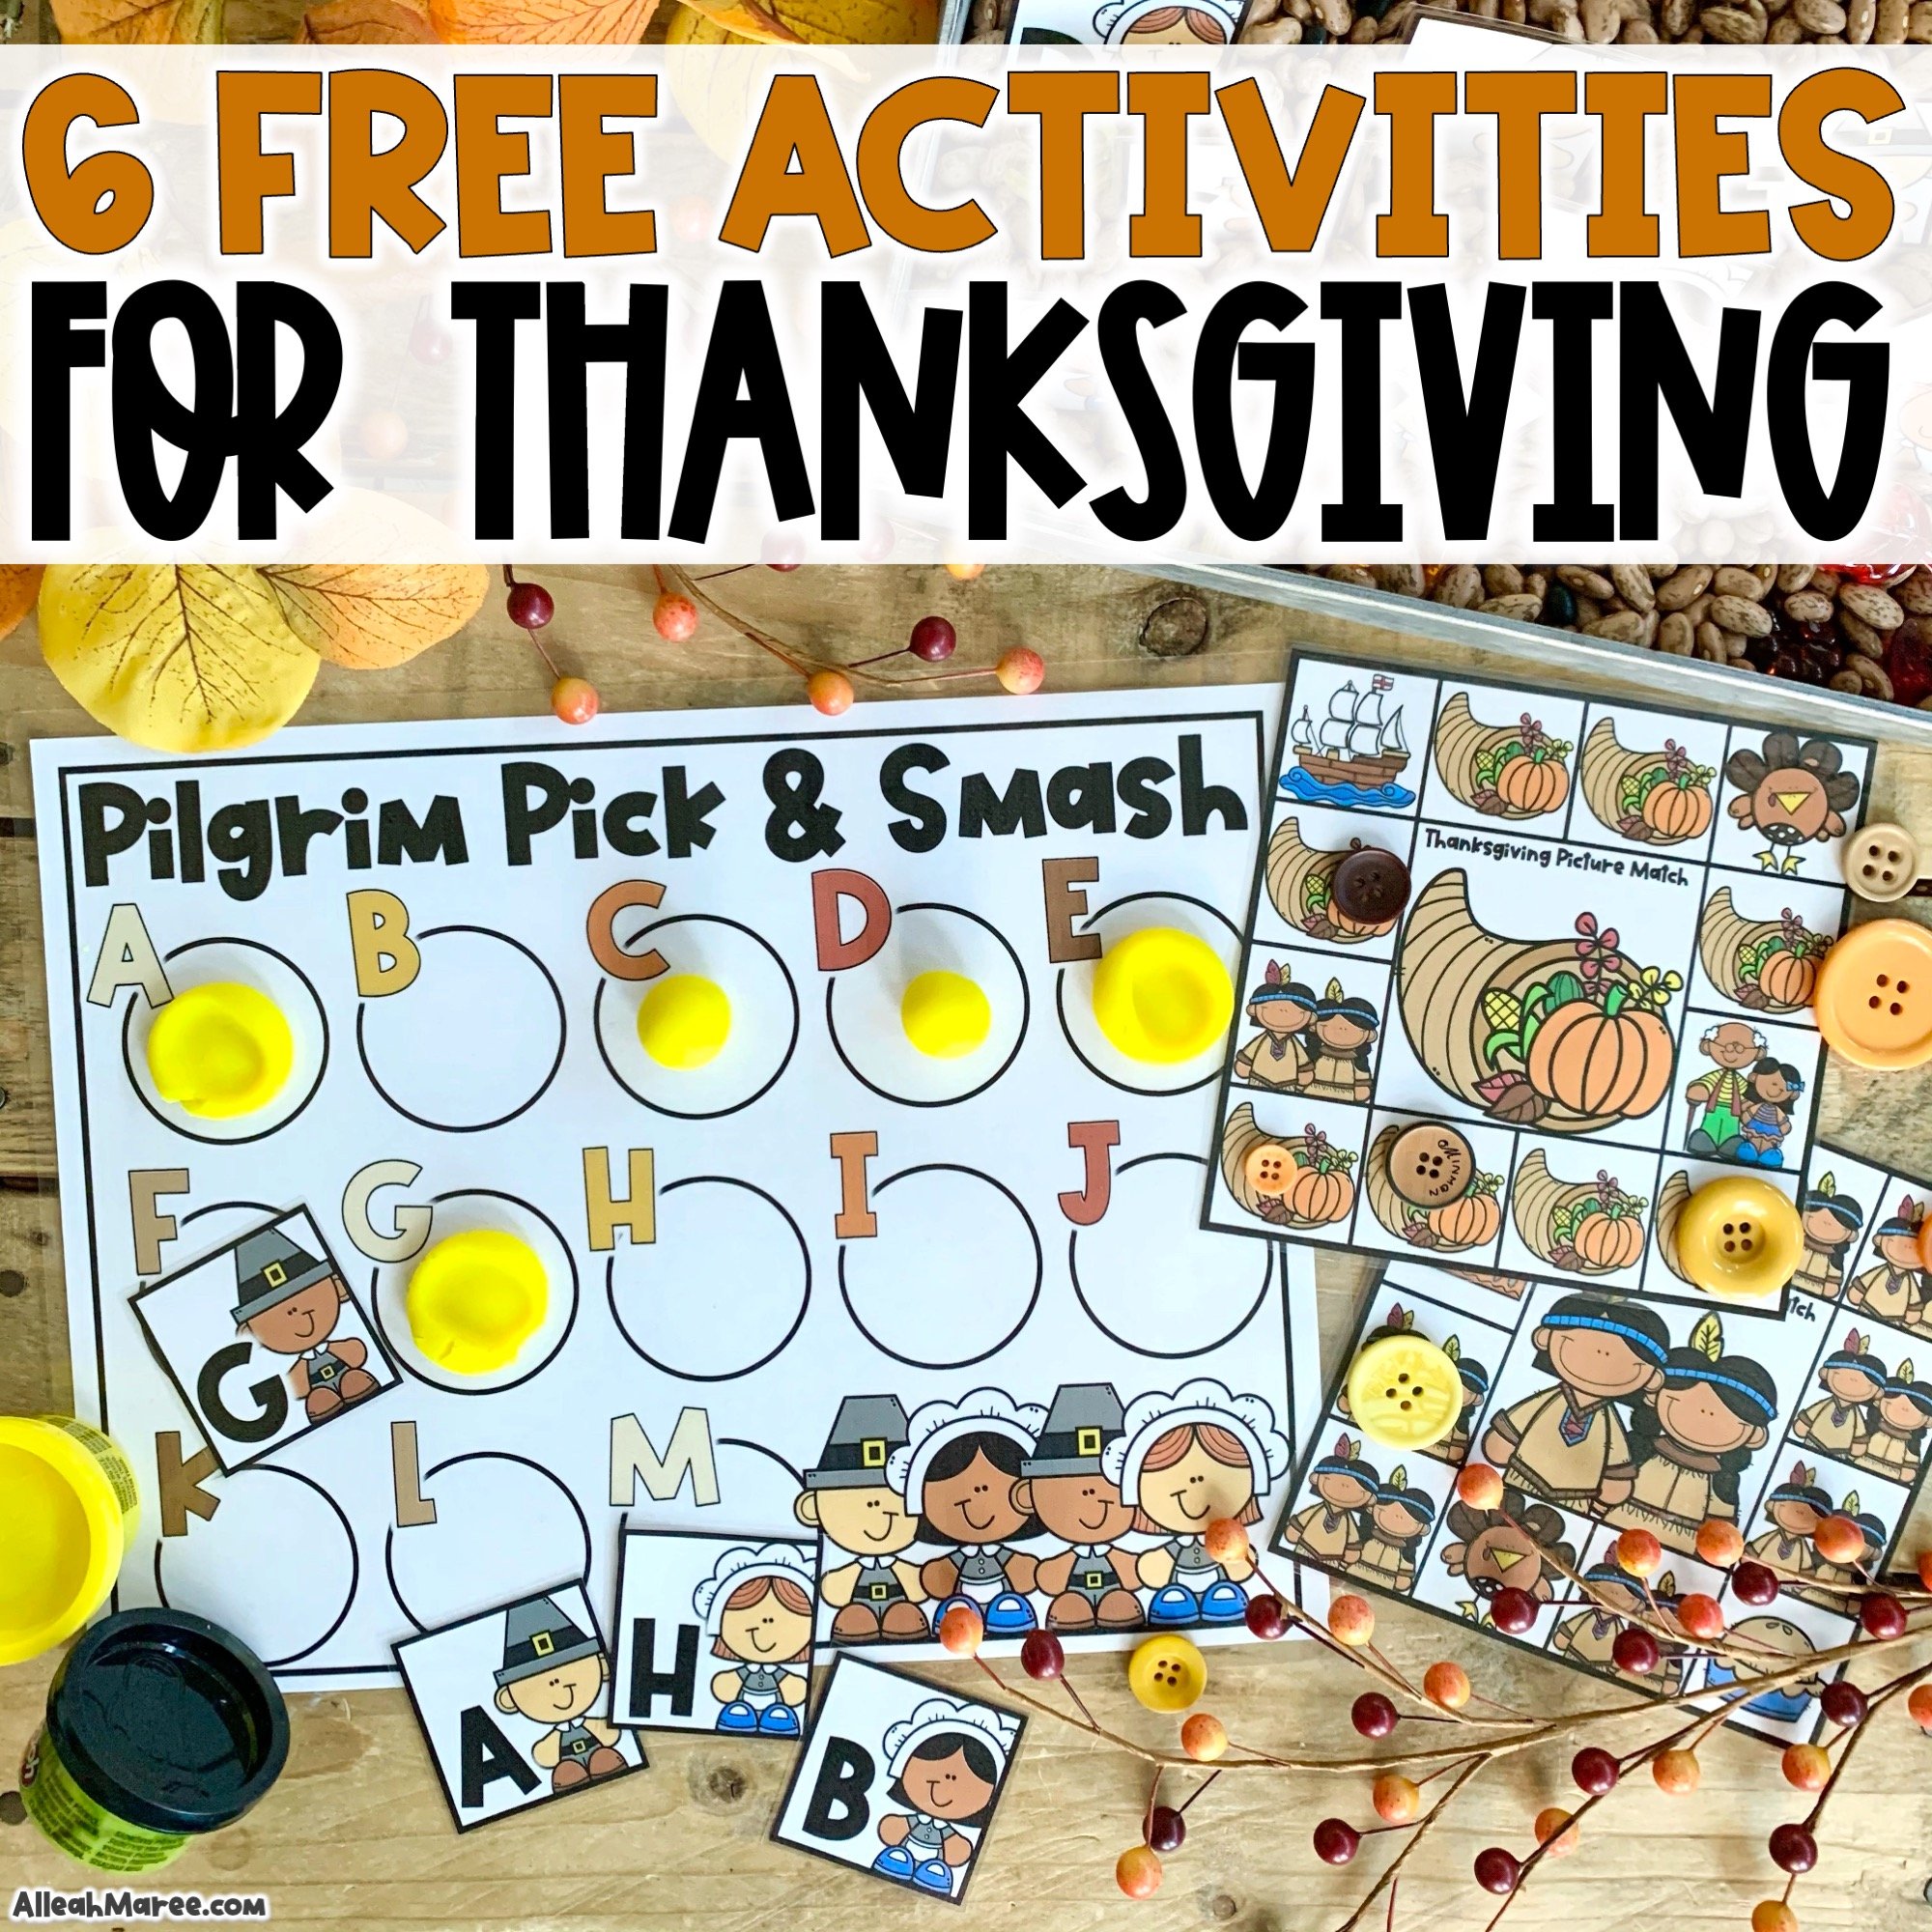 Coloring Turkey Feathers Activity - Sheeking Out